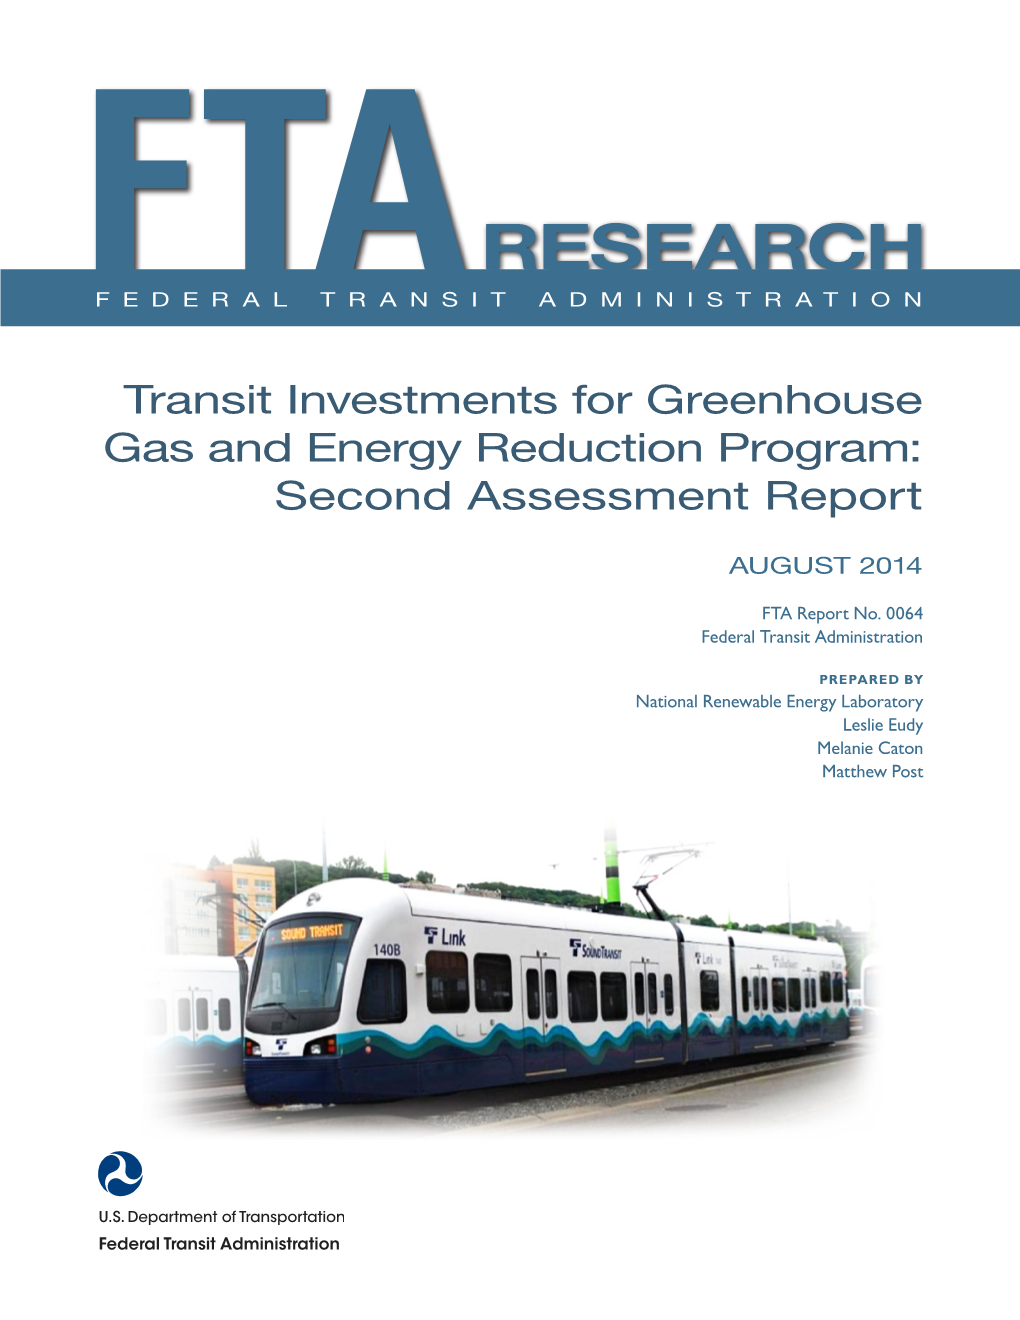 Transit Investments for Greenhouse Gas and Energy Reduction Program: Second Assessment Report